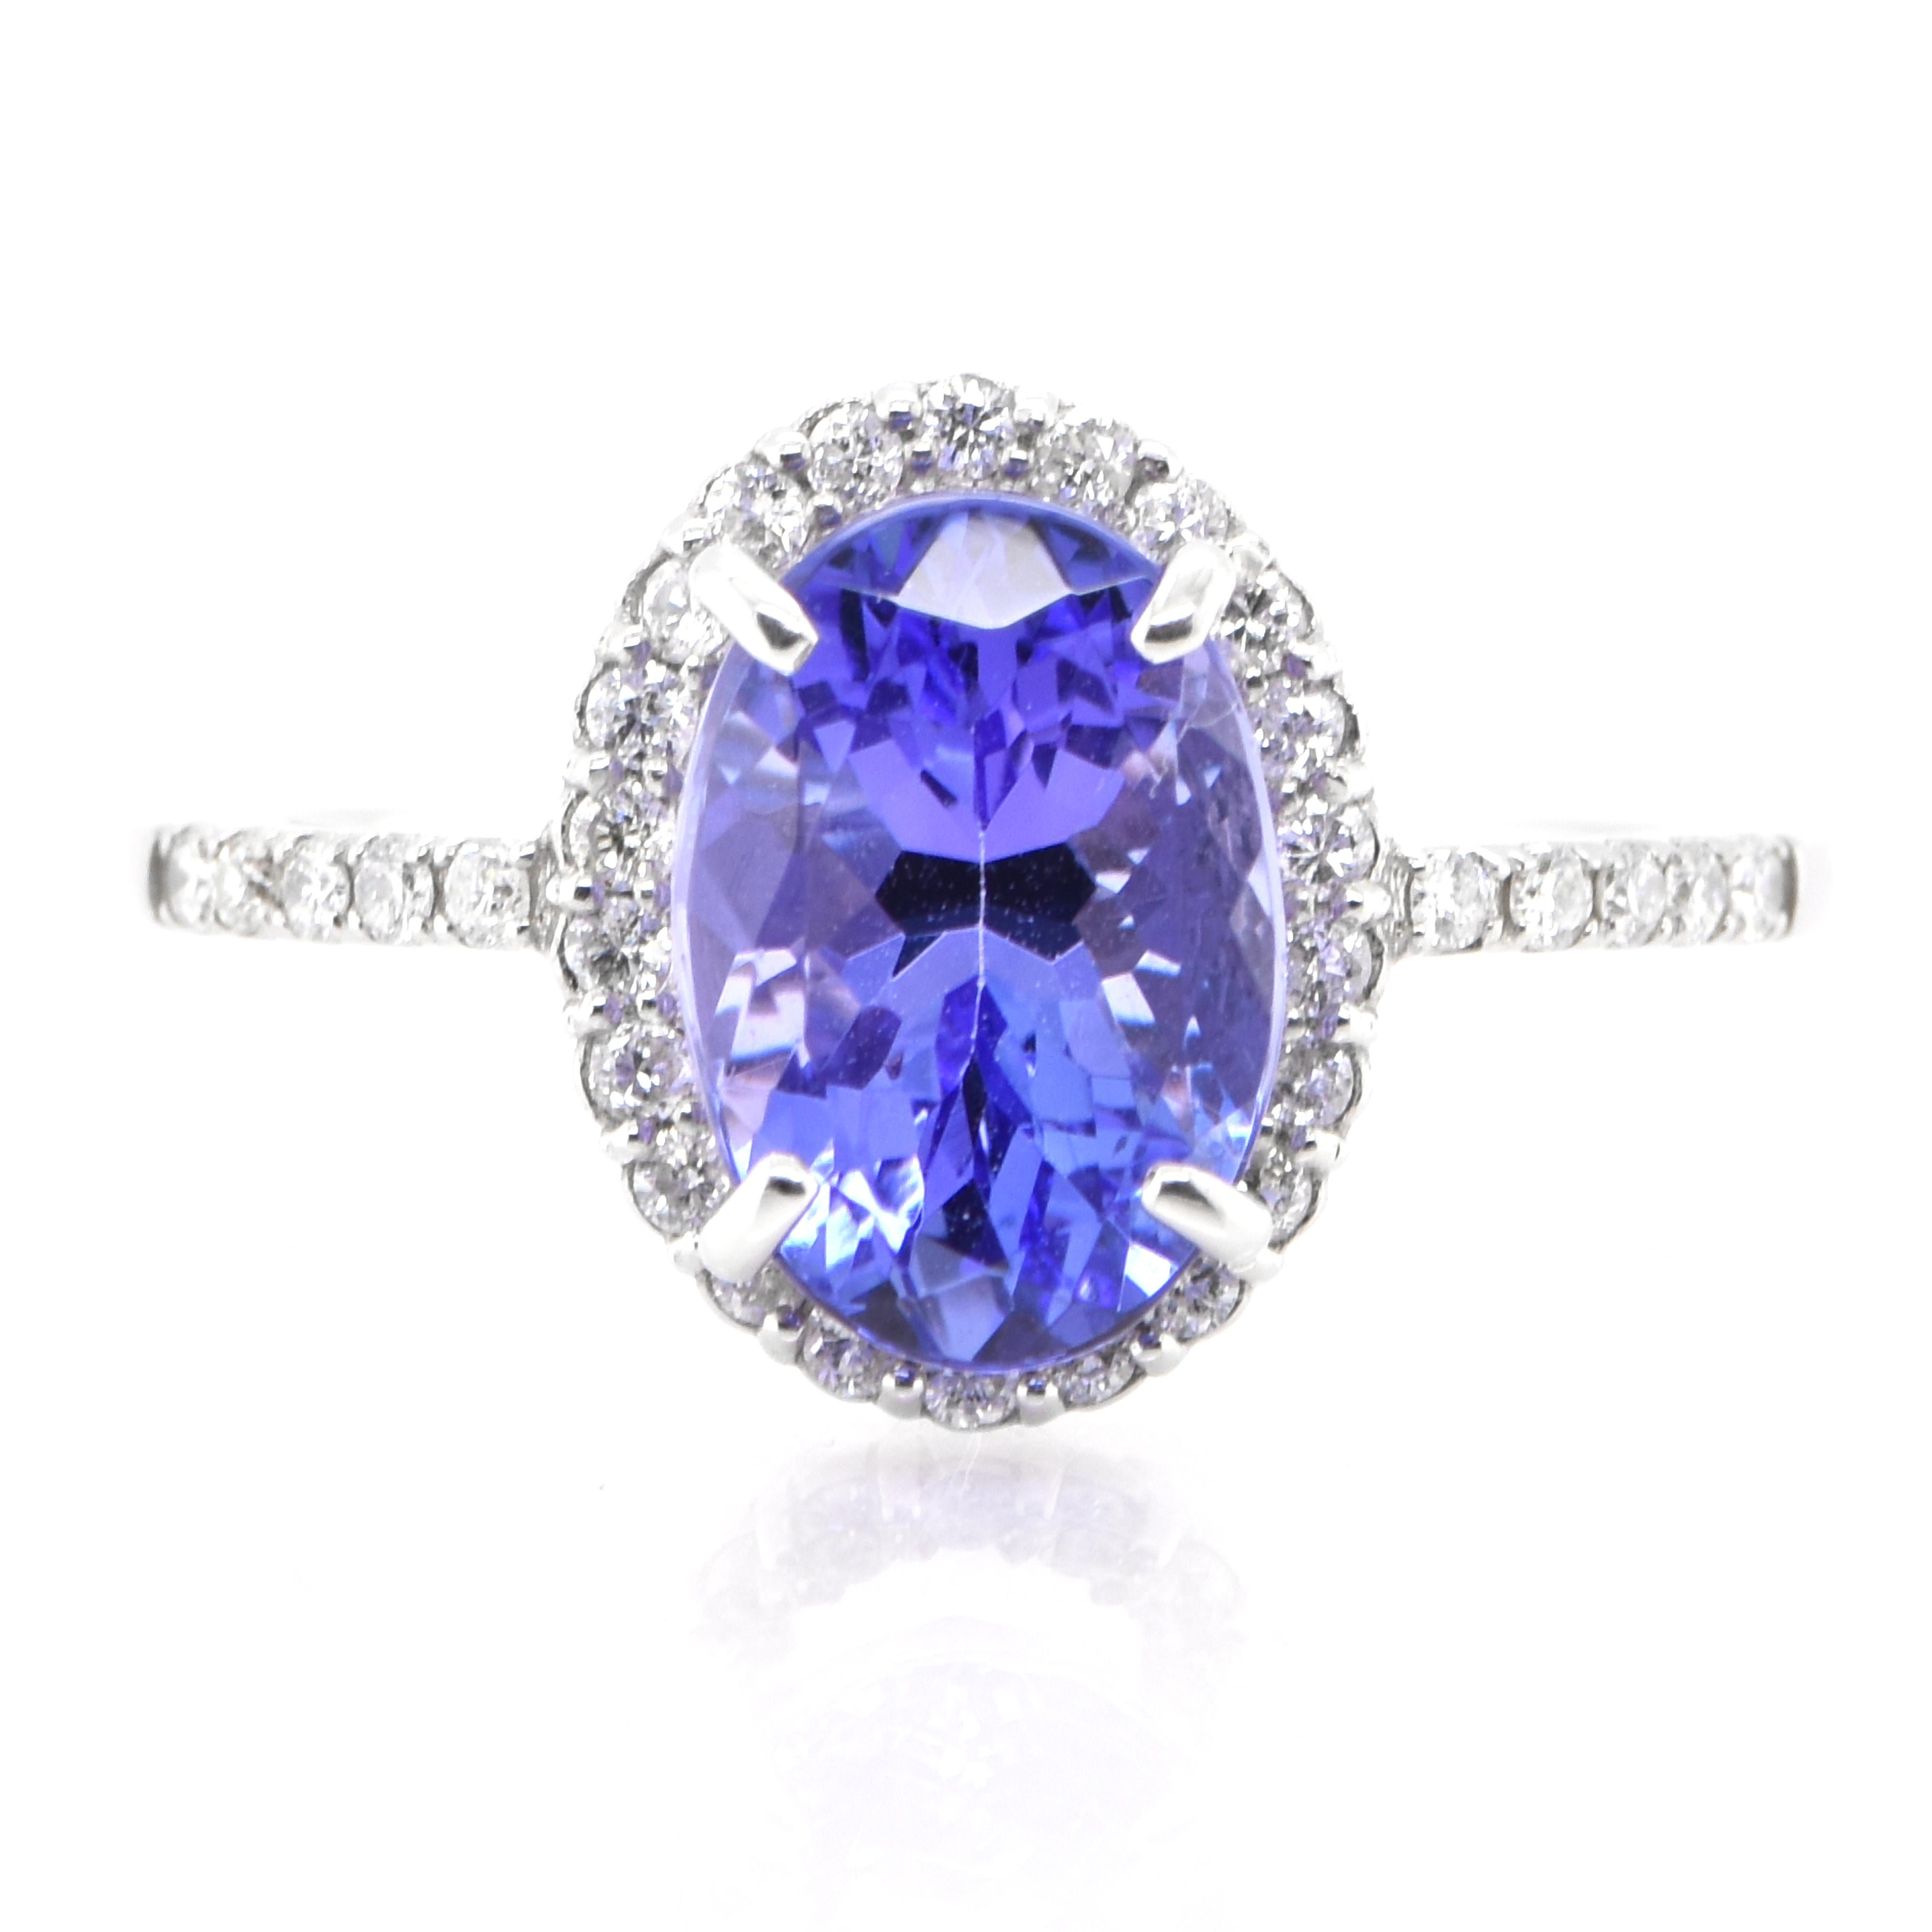 A beautiful ring featuring a 2.85 Carat Natural Tanzanite and 0.24 Carats Diamond Accents set in Platinum. Tanzanite's name was given by Tiffany and Co after its only known source: Tanzania. Tanzanite displays beautiful pleochroic colors meaning